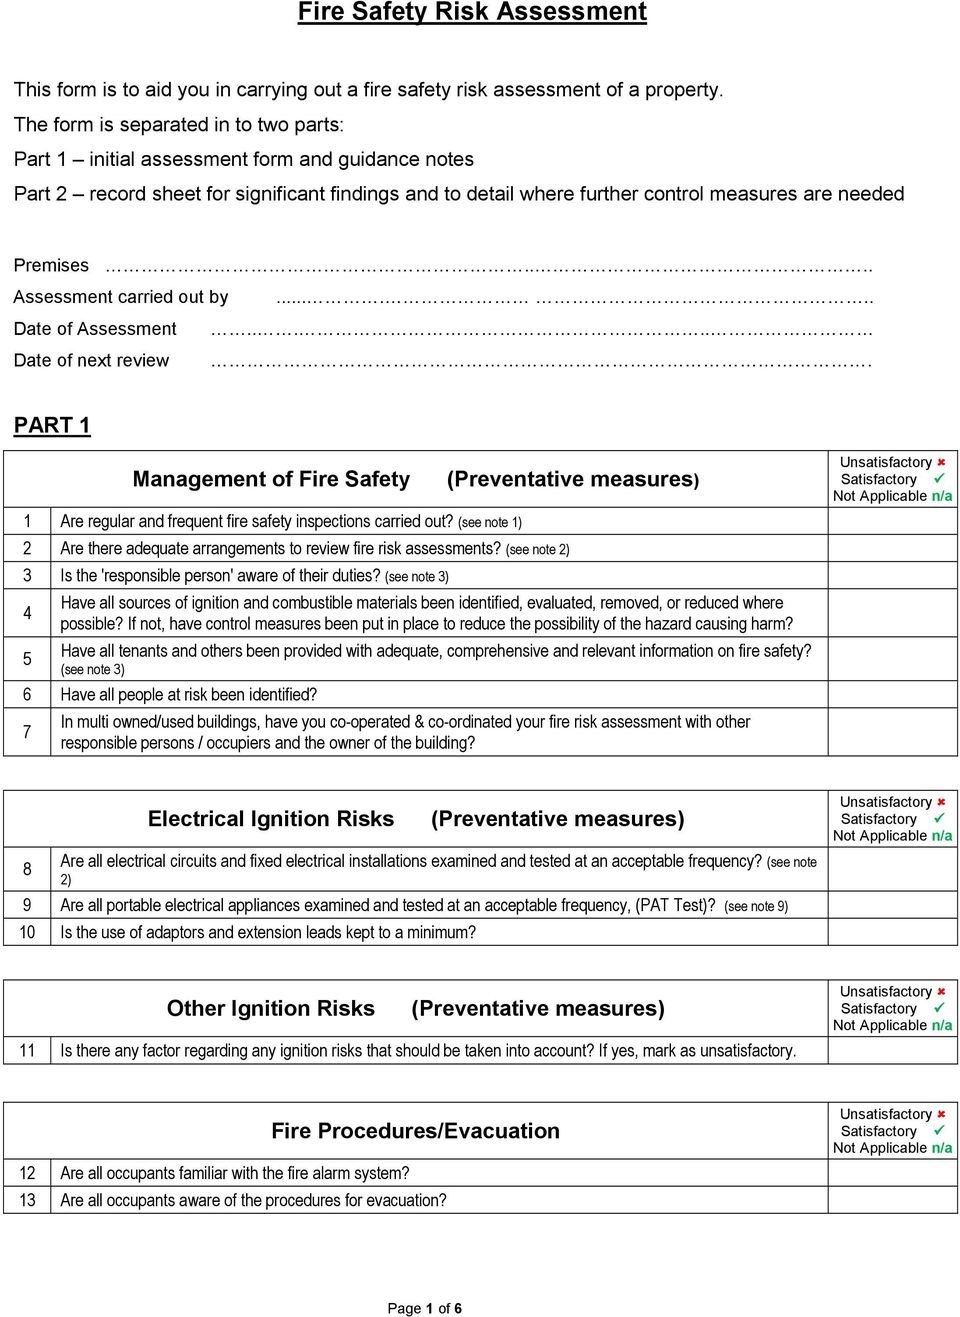 ... Assessment carried out by...... Date of Assessment..... Date of next review. PART 1 Management of Fire Safety 1 Are regular and frequent fire safety inspections carried out?